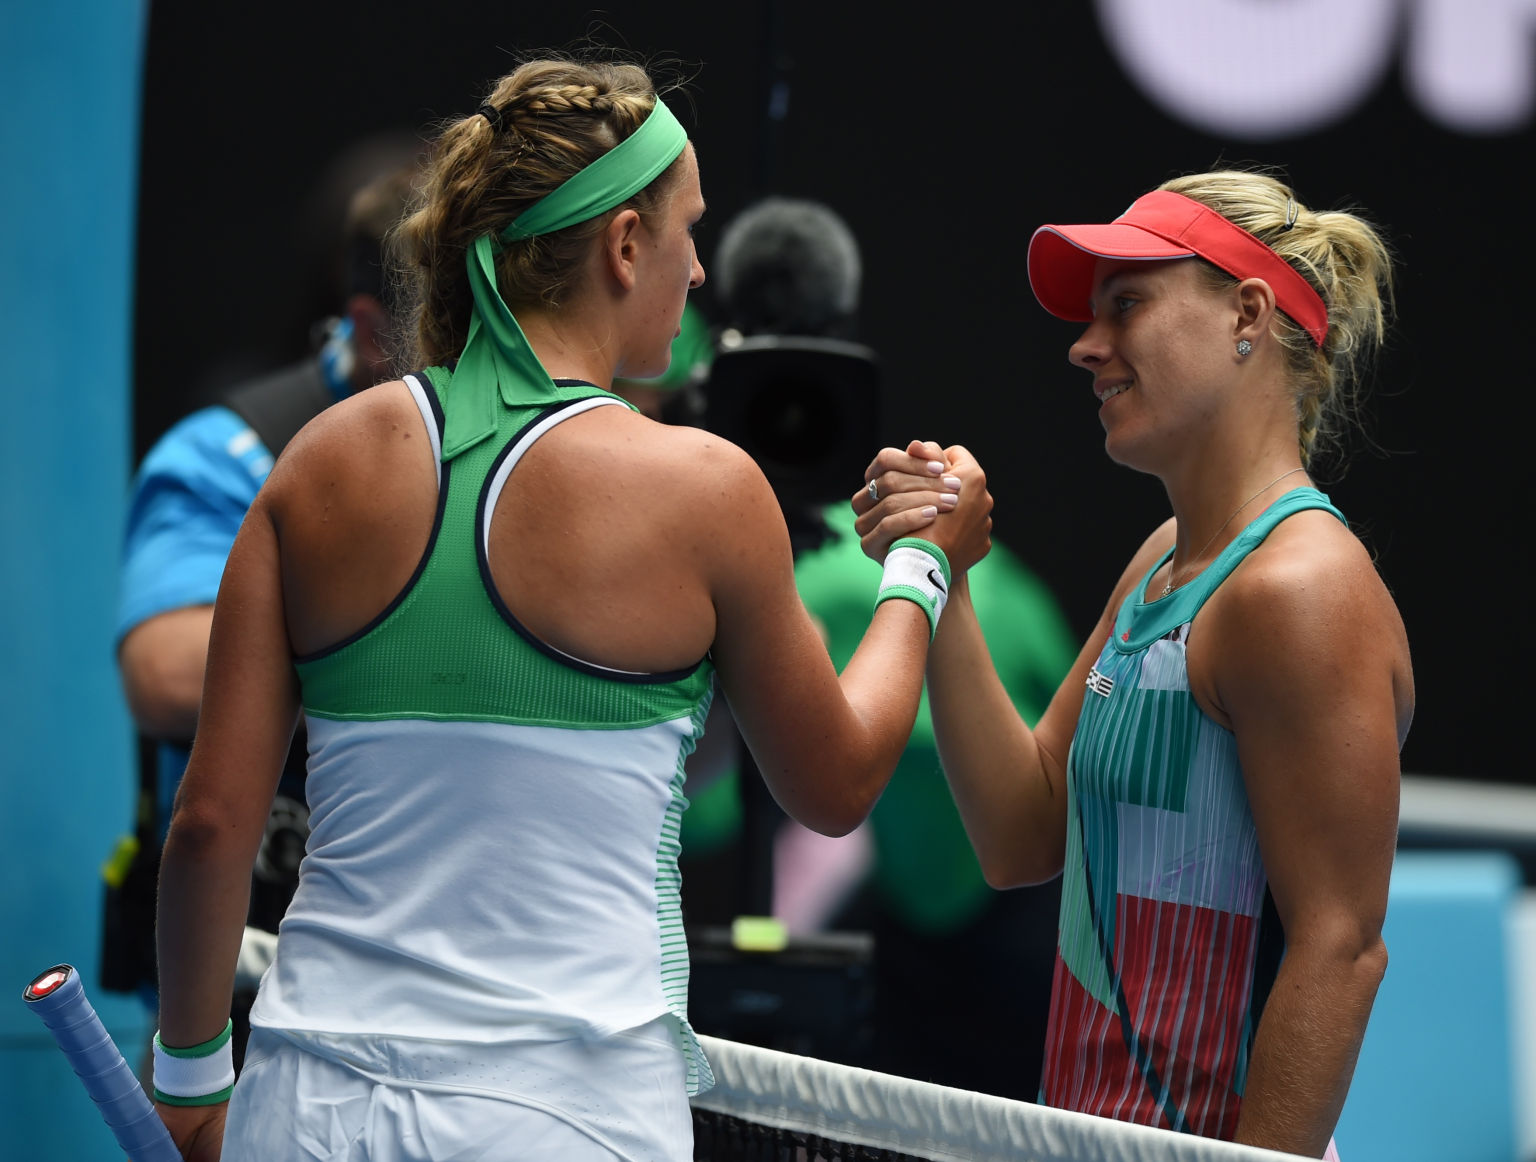 Germany's Angelique Kerber (R) shakes hands as she celebrates after victory in her women's singles match against Belarus's Victoria Azarenka on day ten of the 2016 Australian Open tennis tournament in Melbourne on January 27, 2016. AFP PHOTO / GREG WOOD-- IMAGE RESTRICTED TO EDITORIAL USE - STRICTLY NO COMMERCIAL USE / AFP / GREG WOOD        (Photo credit should read GREG WOOD/AFP/Getty Images)